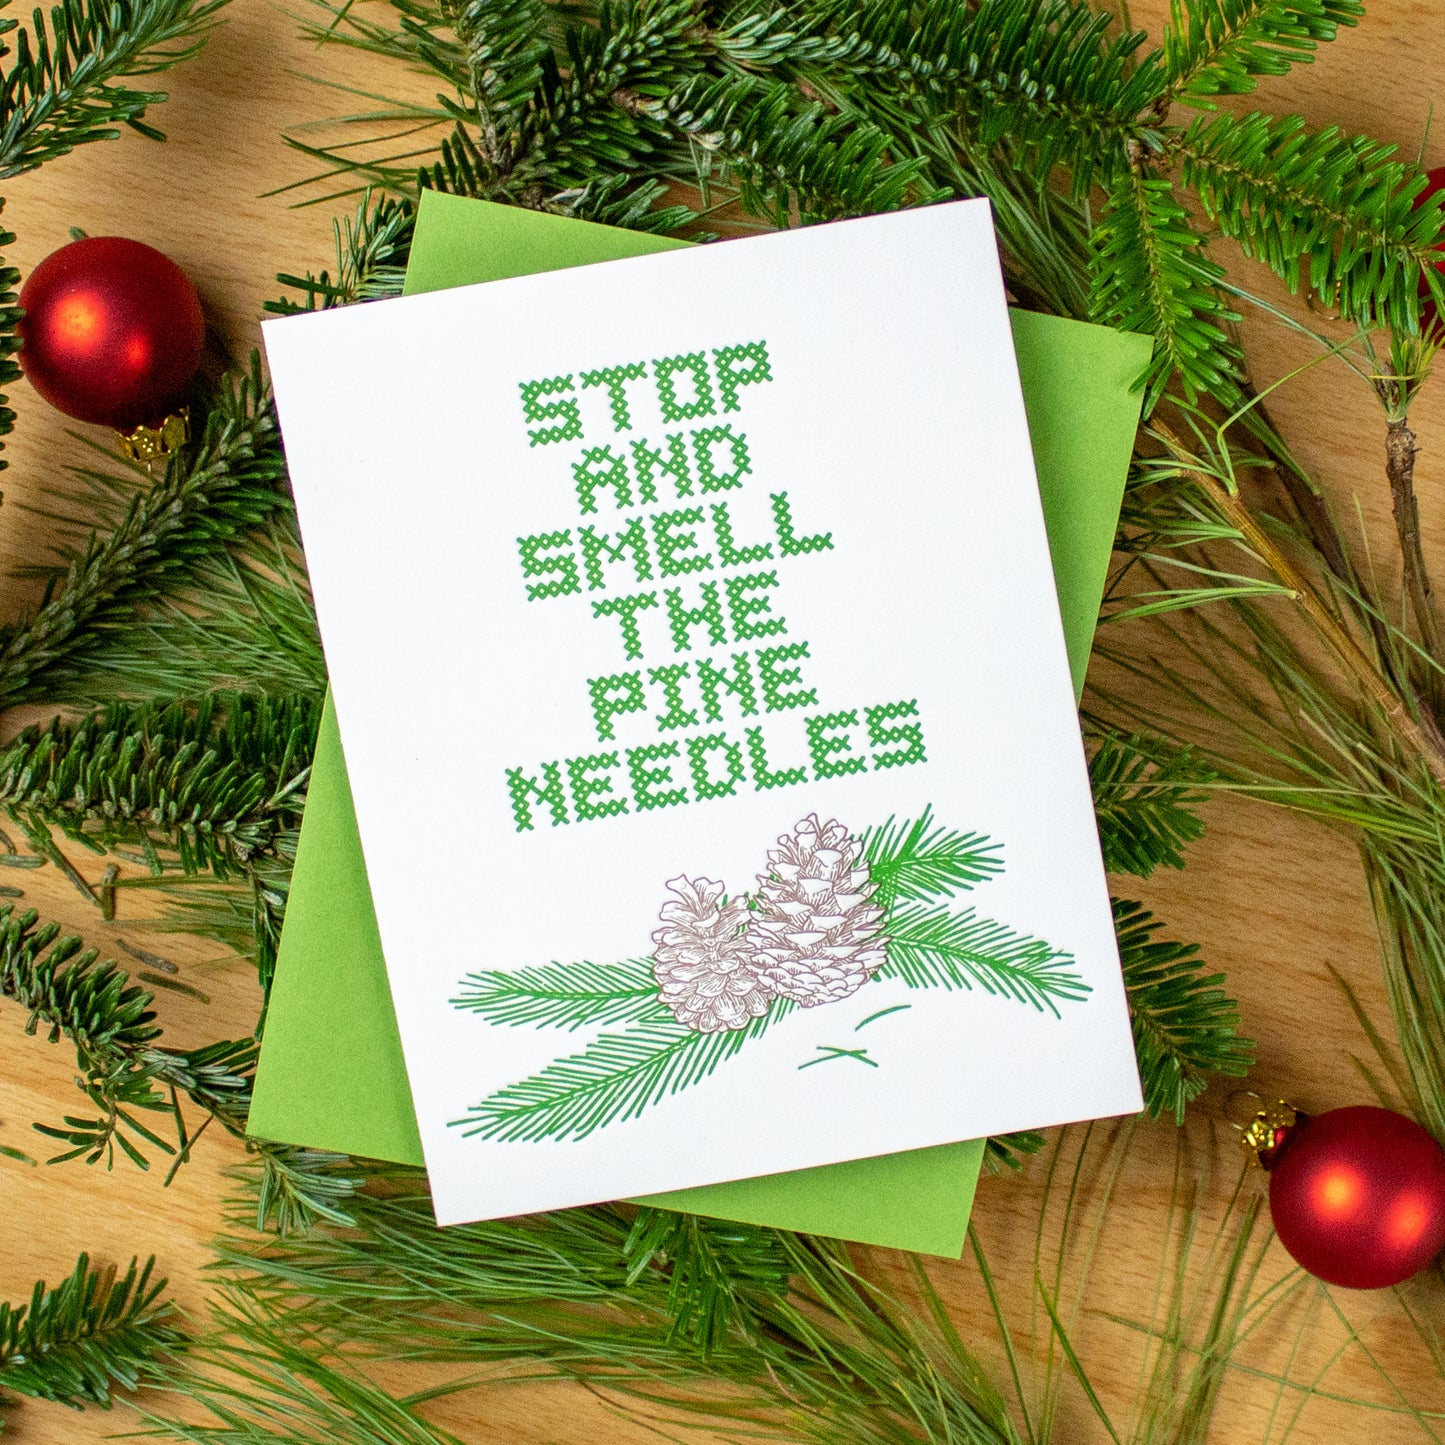 Smell the Pine Needles Letterpress Card